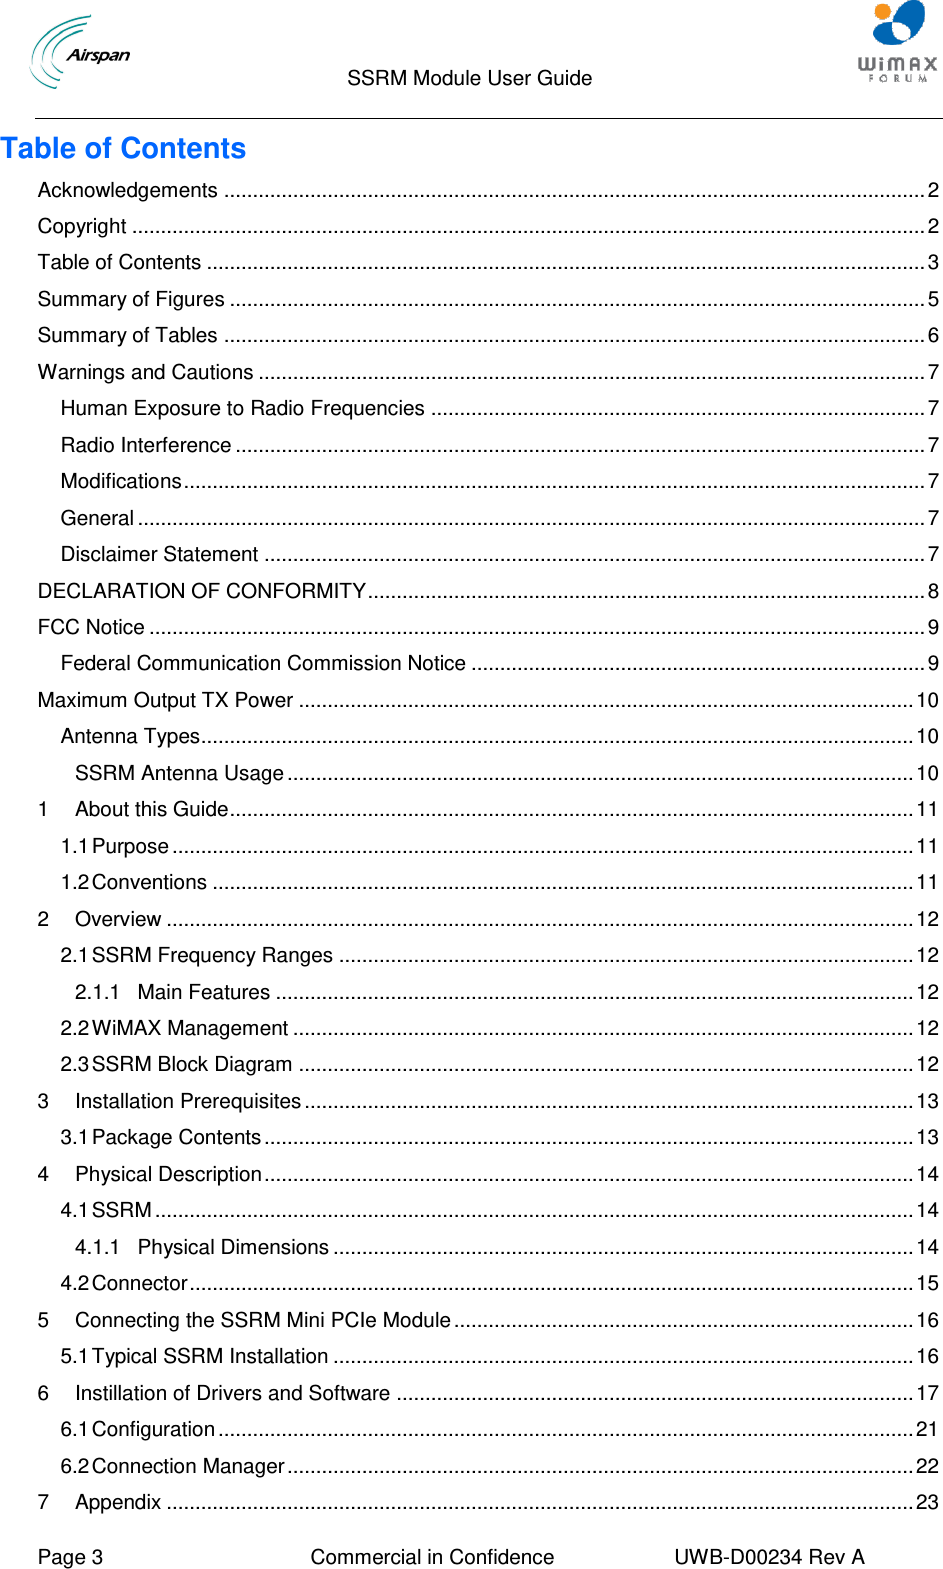                                  SSRM Module User Guide     Page 3  Commercial in Confidence  UWB-D00234 Rev A    Table of Contents Acknowledgements .......................................................................................................................... 2 Copyright .......................................................................................................................................... 2 Table of Contents ............................................................................................................................. 3 Summary of Figures ......................................................................................................................... 5 Summary of Tables .......................................................................................................................... 6 Warnings and Cautions .................................................................................................................... 7 Human Exposure to Radio Frequencies ...................................................................................... 7 Radio Interference ........................................................................................................................ 7 Modifications ................................................................................................................................. 7 General ......................................................................................................................................... 7 Disclaimer Statement ................................................................................................................... 7 DECLARATION OF CONFORMITY ................................................................................................. 8 FCC Notice ....................................................................................................................................... 9 Federal Communication Commission Notice ............................................................................... 9 Maximum Output TX Power ........................................................................................................... 10 Antenna Types............................................................................................................................ 10 SSRM Antenna Usage ............................................................................................................. 10 1 About this Guide ....................................................................................................................... 11 1.1 Purpose ................................................................................................................................. 11 1.2 Conventions .......................................................................................................................... 11 2 Overview .................................................................................................................................. 12 2.1 SSRM Frequency Ranges .................................................................................................... 12 2.1.1 Main Features ............................................................................................................... 12 2.2 WiMAX Management ............................................................................................................ 12 2.3 SSRM Block Diagram ........................................................................................................... 12 3 Installation Prerequisites .......................................................................................................... 13 3.1 Package Contents ................................................................................................................. 13 4 Physical Description ................................................................................................................. 14 4.1 SSRM .................................................................................................................................... 14 4.1.1 Physical Dimensions ..................................................................................................... 14 4.2 Connector .............................................................................................................................. 15 5 Connecting the SSRM Mini PCIe Module ................................................................................ 16 5.1 Typical SSRM Installation ..................................................................................................... 16 6 Instillation of Drivers and Software .......................................................................................... 17 6.1 Configuration ......................................................................................................................... 21 6.2 Connection Manager ............................................................................................................. 22 7 Appendix .................................................................................................................................. 23 